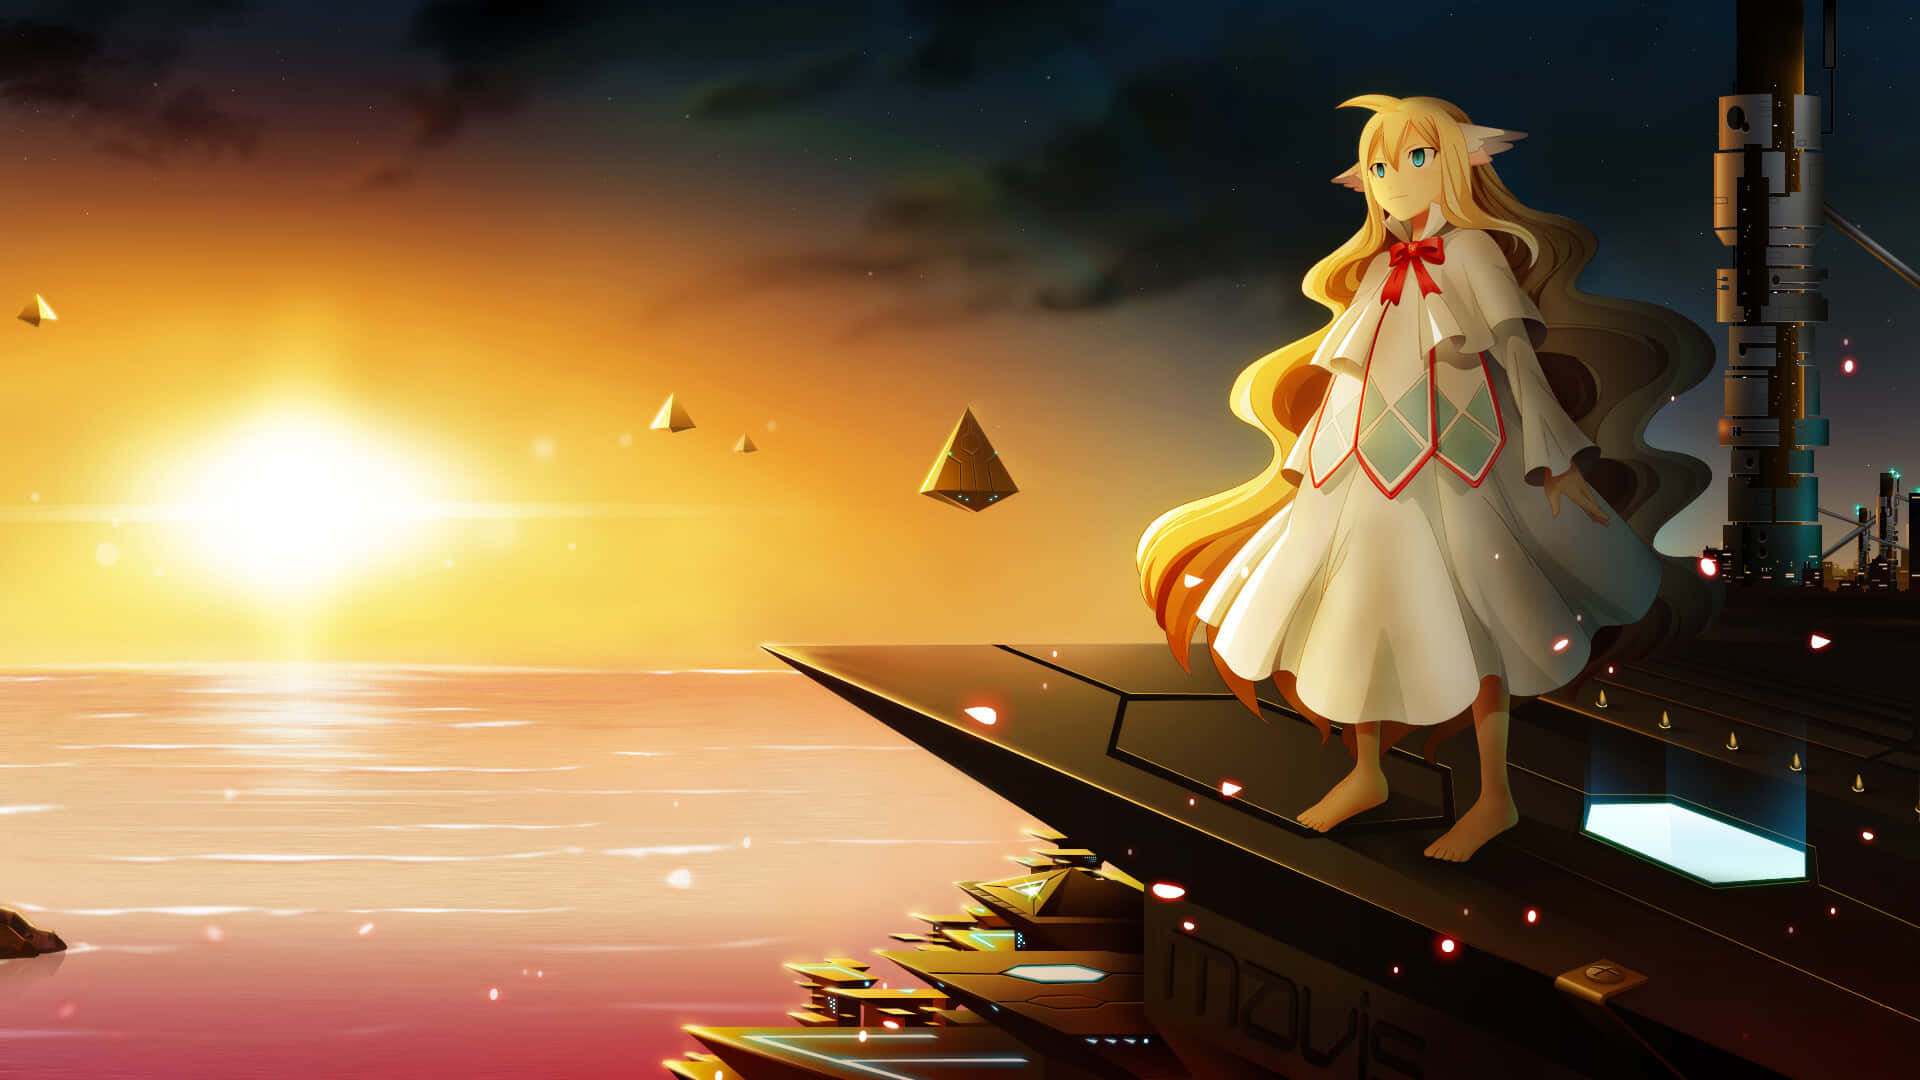 Mavis Vermillion looking enchanting in her ethereal form against a magical background Wallpaper